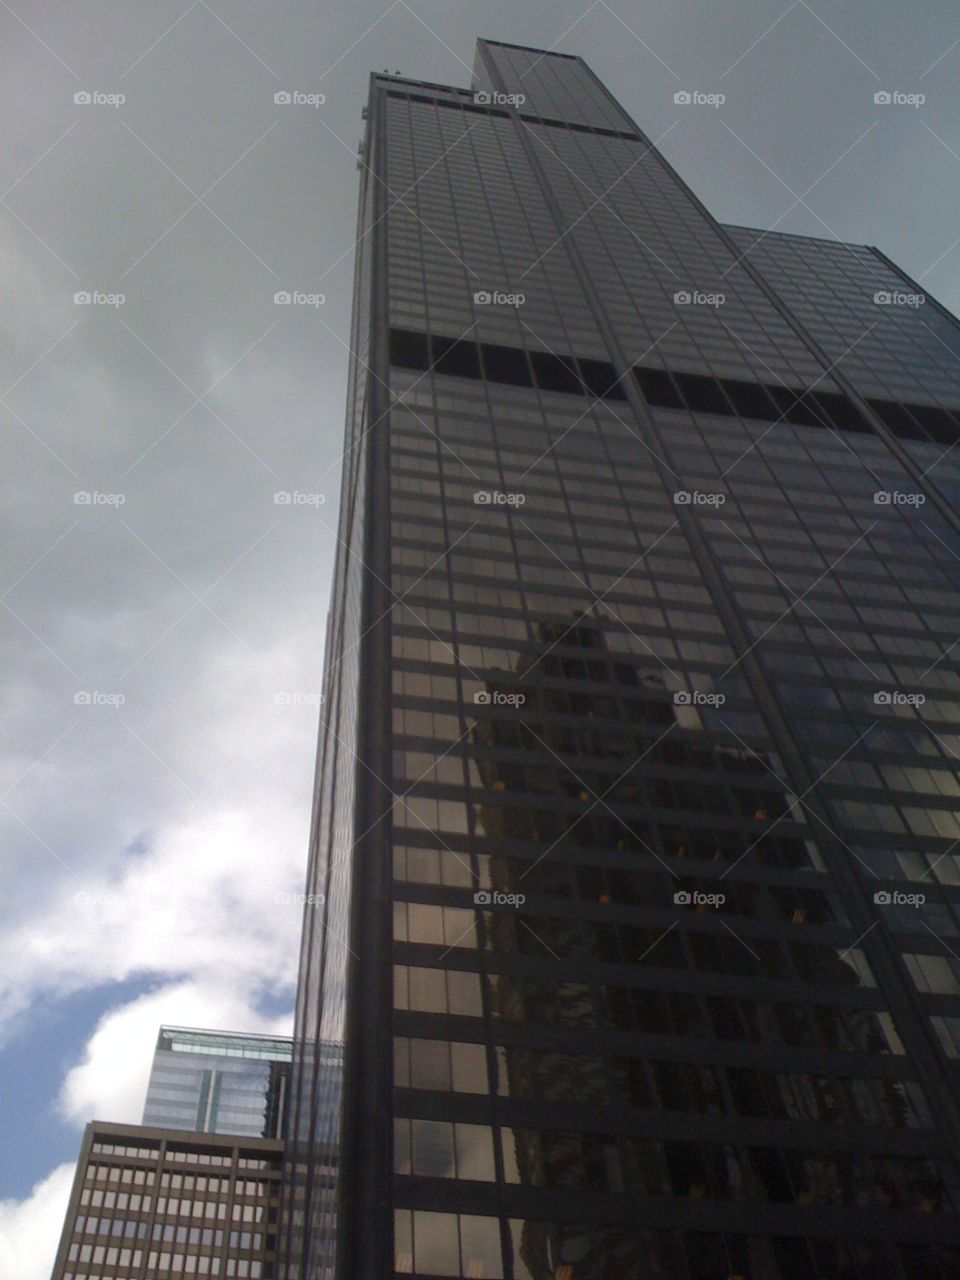 It will always be Sears tower to me 